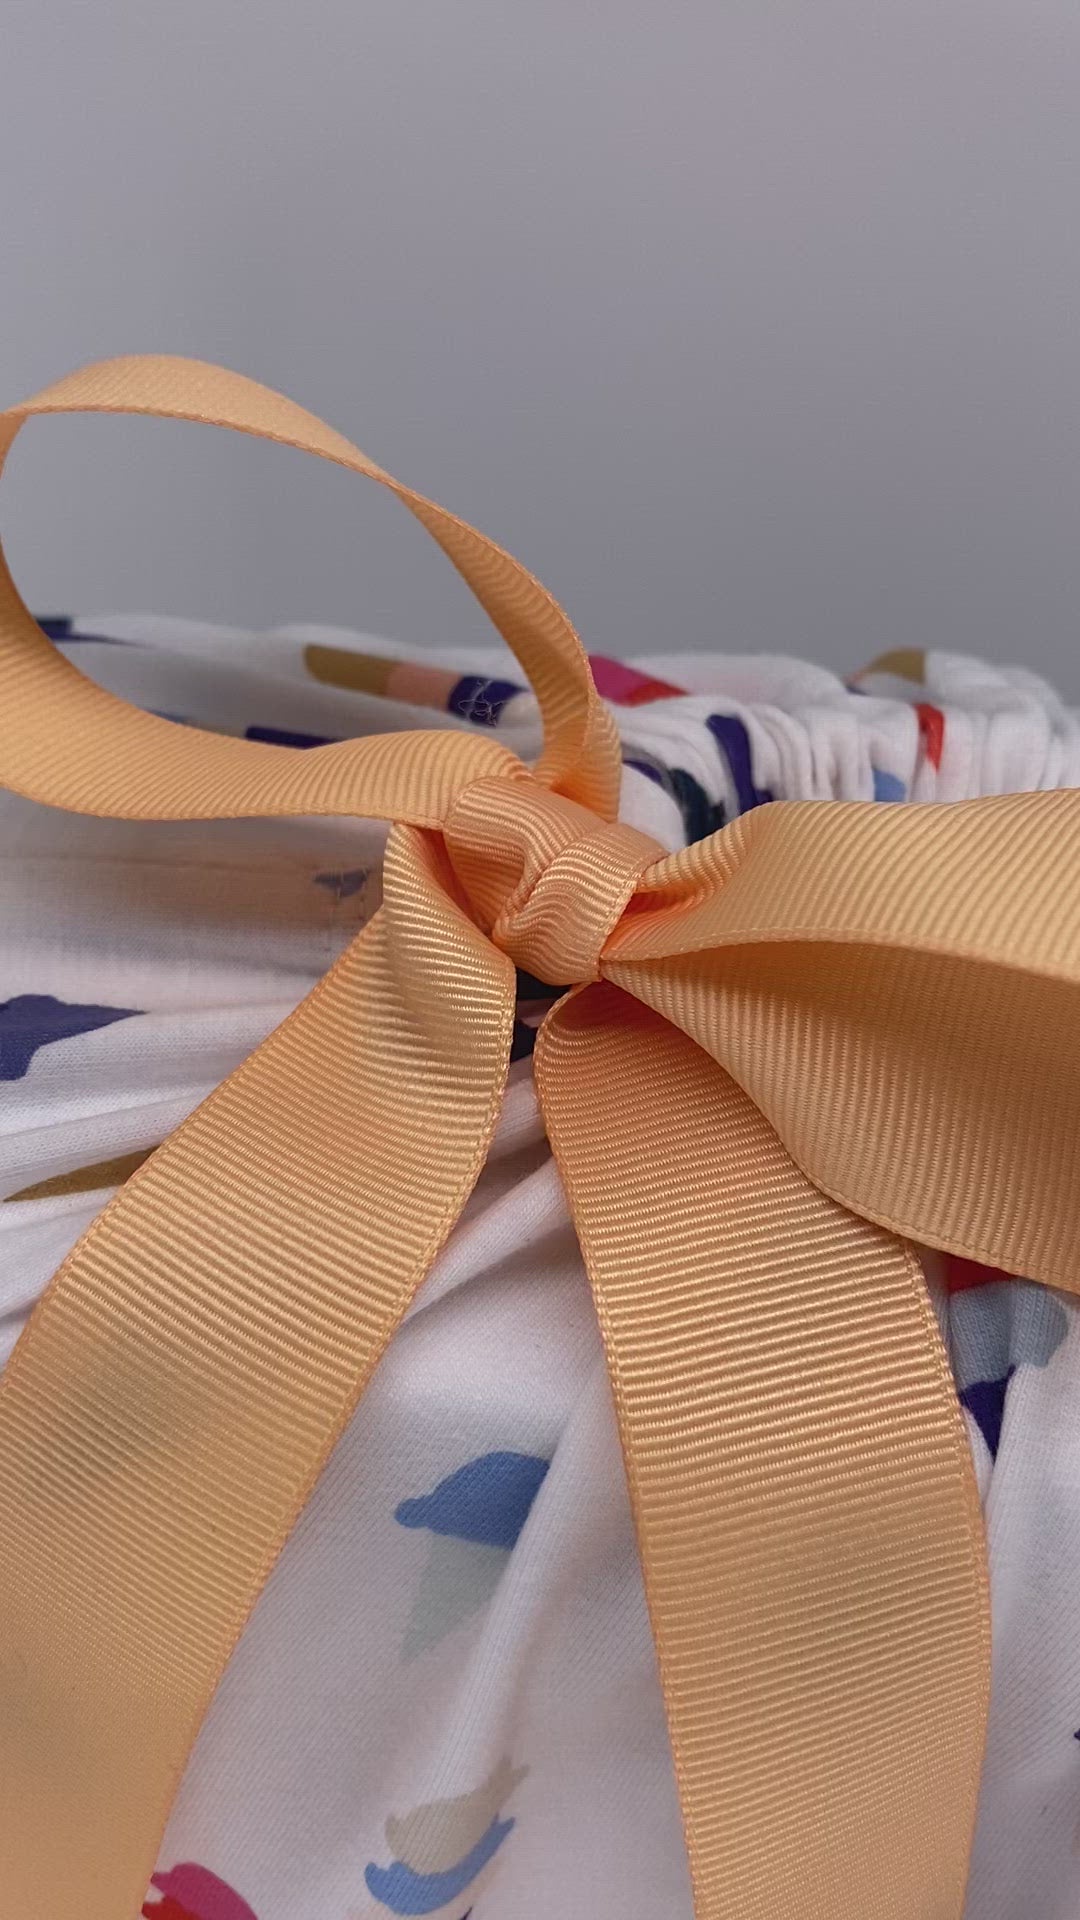 sustainable and reusable fabric gift bag in ice-cream fabric pattern with ribbon video